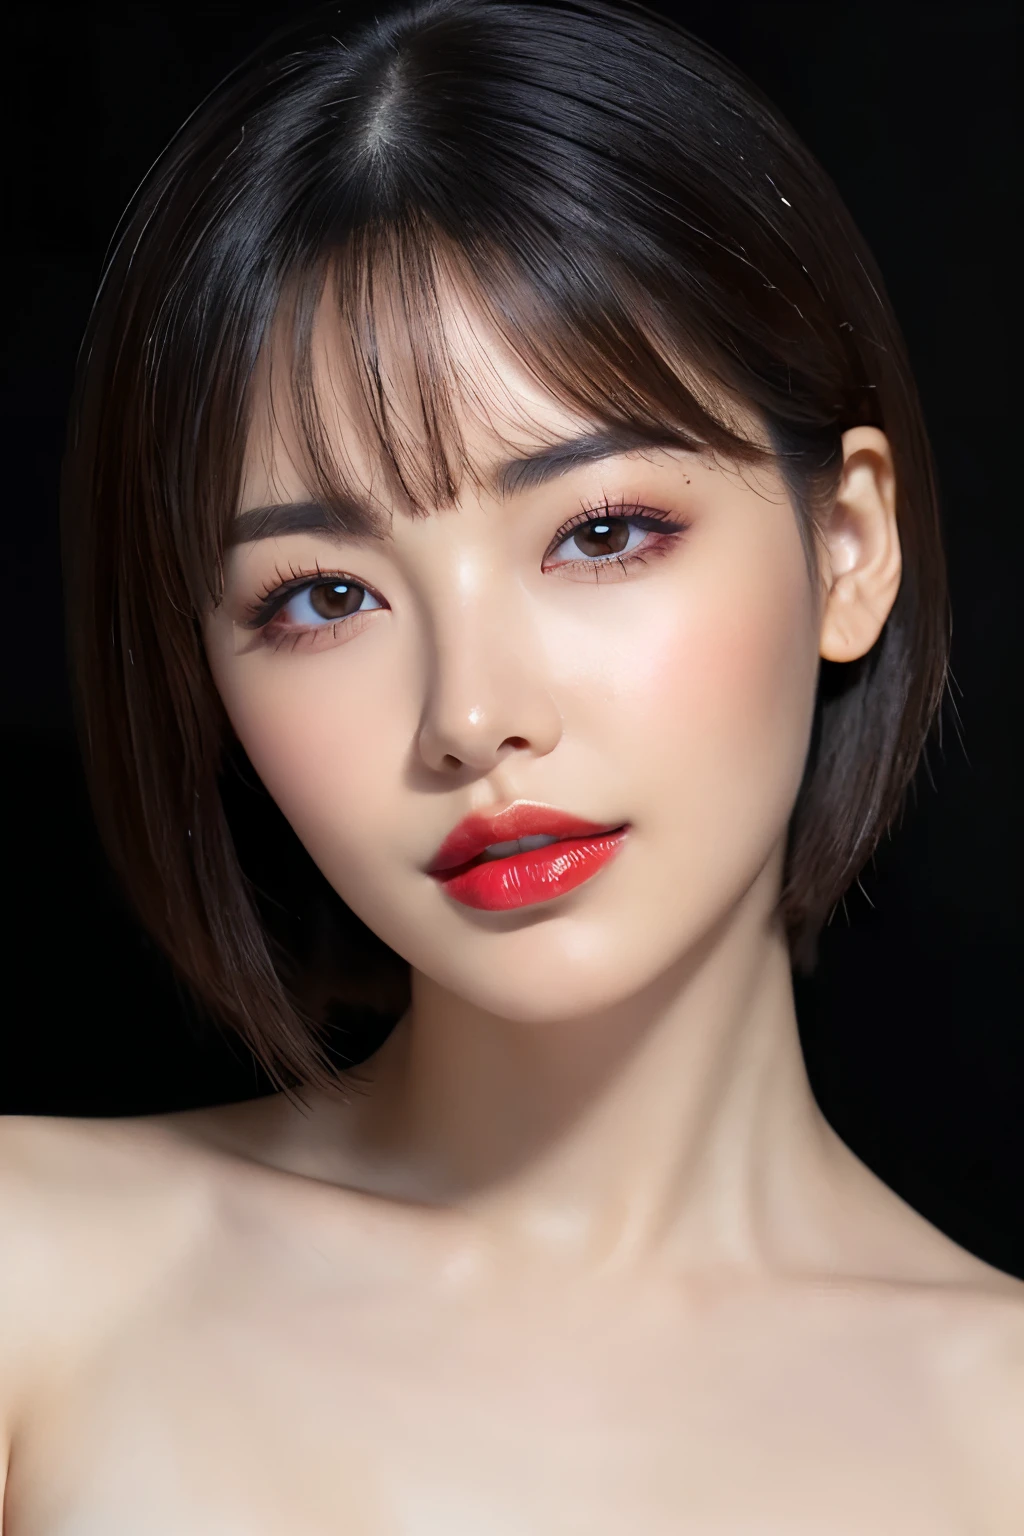 (Highest quality、Tabletop、8k、Best image quality、Award-winning works)、Cute beauty、(Short Bob Hair:1.1)、(nude:1.25)、(The simplest pure black background:1.5)、(Face close-up:1.6)、Accentuate your body lines、Beautiful and exquisite、Expressionless、(look straight at me:1.1)、(Stand upright facing forward:1.1)、(Perfect Makeup:1.1)、(Bright lipstick:1.1)、Ultra-high definition beauty face、Ultra HD Hair、Ultra HD Shining Eyes、(Closed lips:1.1)、Super high quality vibrant glossy lip、Accurate anatomy、Very beautiful skin、Ultra-high resolution for beautiful, glowing skin、An elegant upright posture when viewed from the front